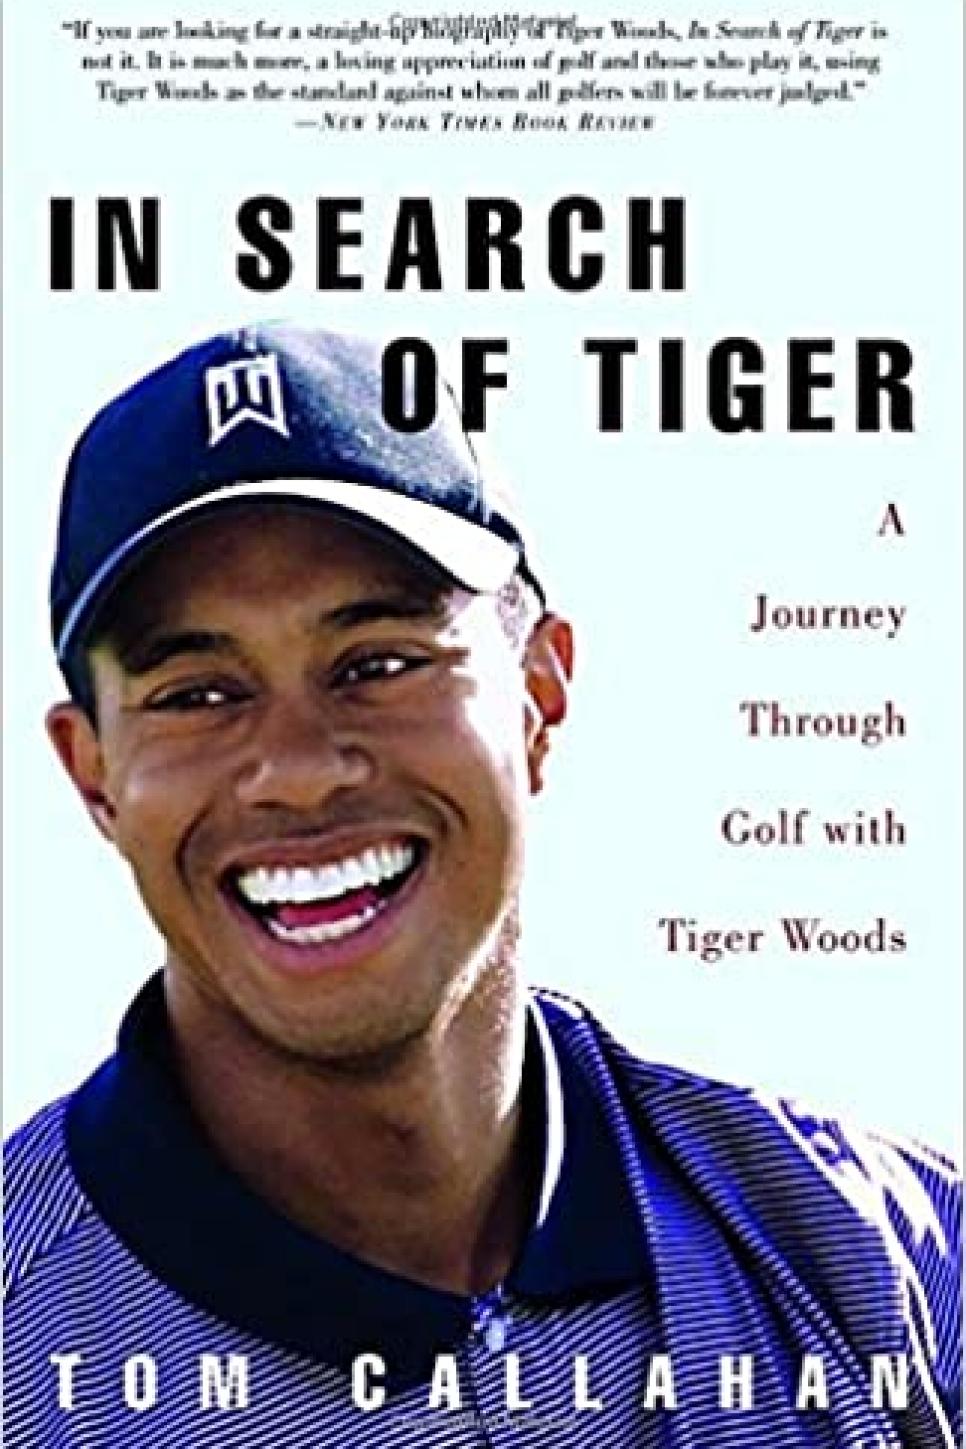 In Search of Tiger: A Journey Through Golf with Tiger Woods By Tom Callahan (2003)